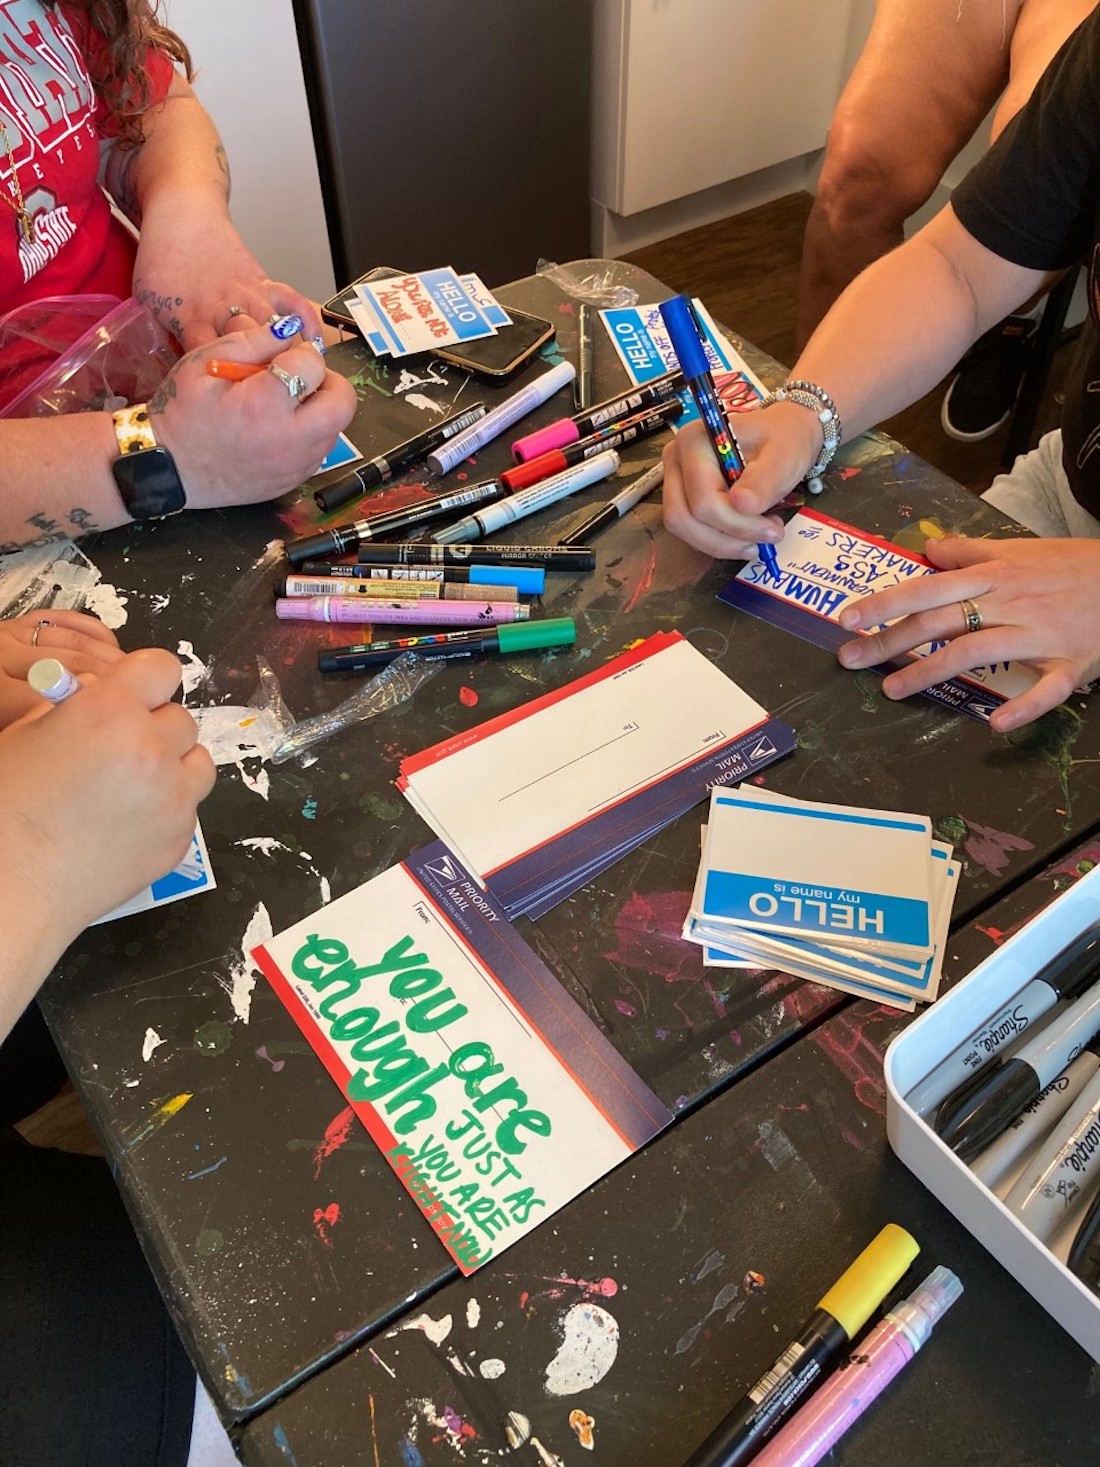 A paint-spattered work table holds markers and blank name tags. Individuals seen from shoulders down hold markers as they embellish the name tags. A small sign on the table reads, "You are enough just as you are."